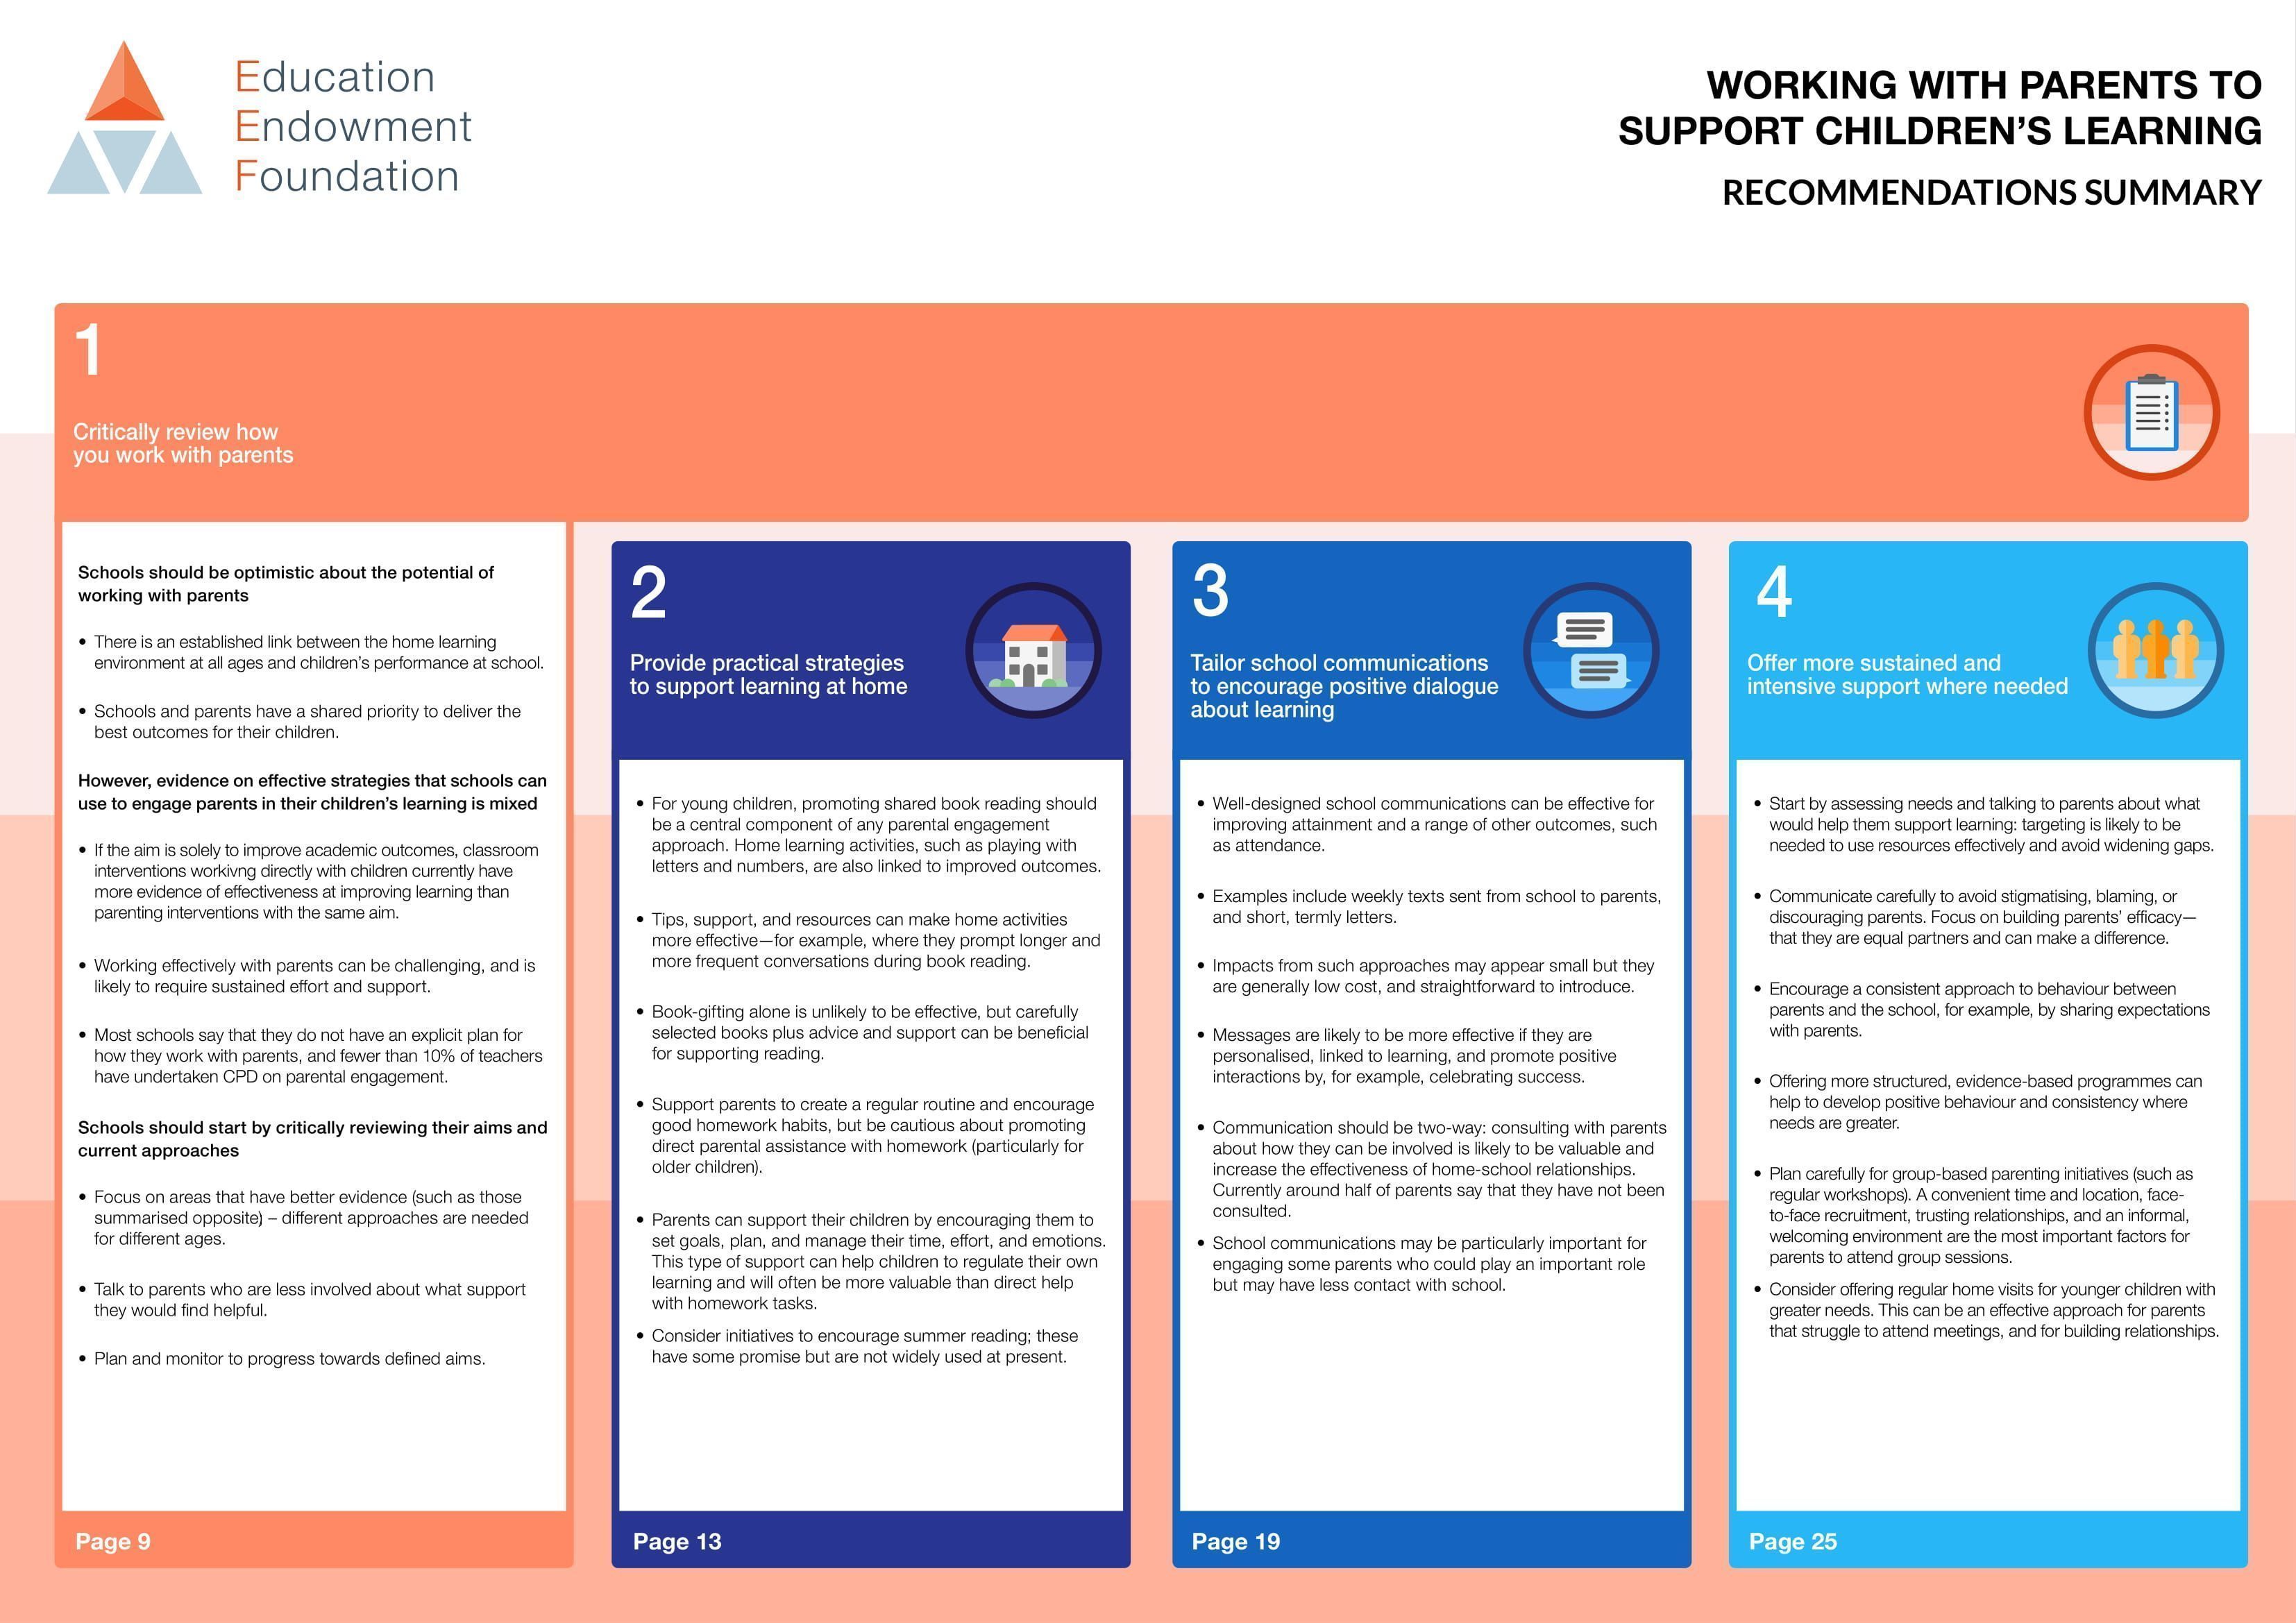 EEF on Twitter: "Looking clear and actionable working with parents to support their children's learning? The new EEF guidance report includes recommendations in four key areas. Download now: https://t.co/Y9p0KVzwk7